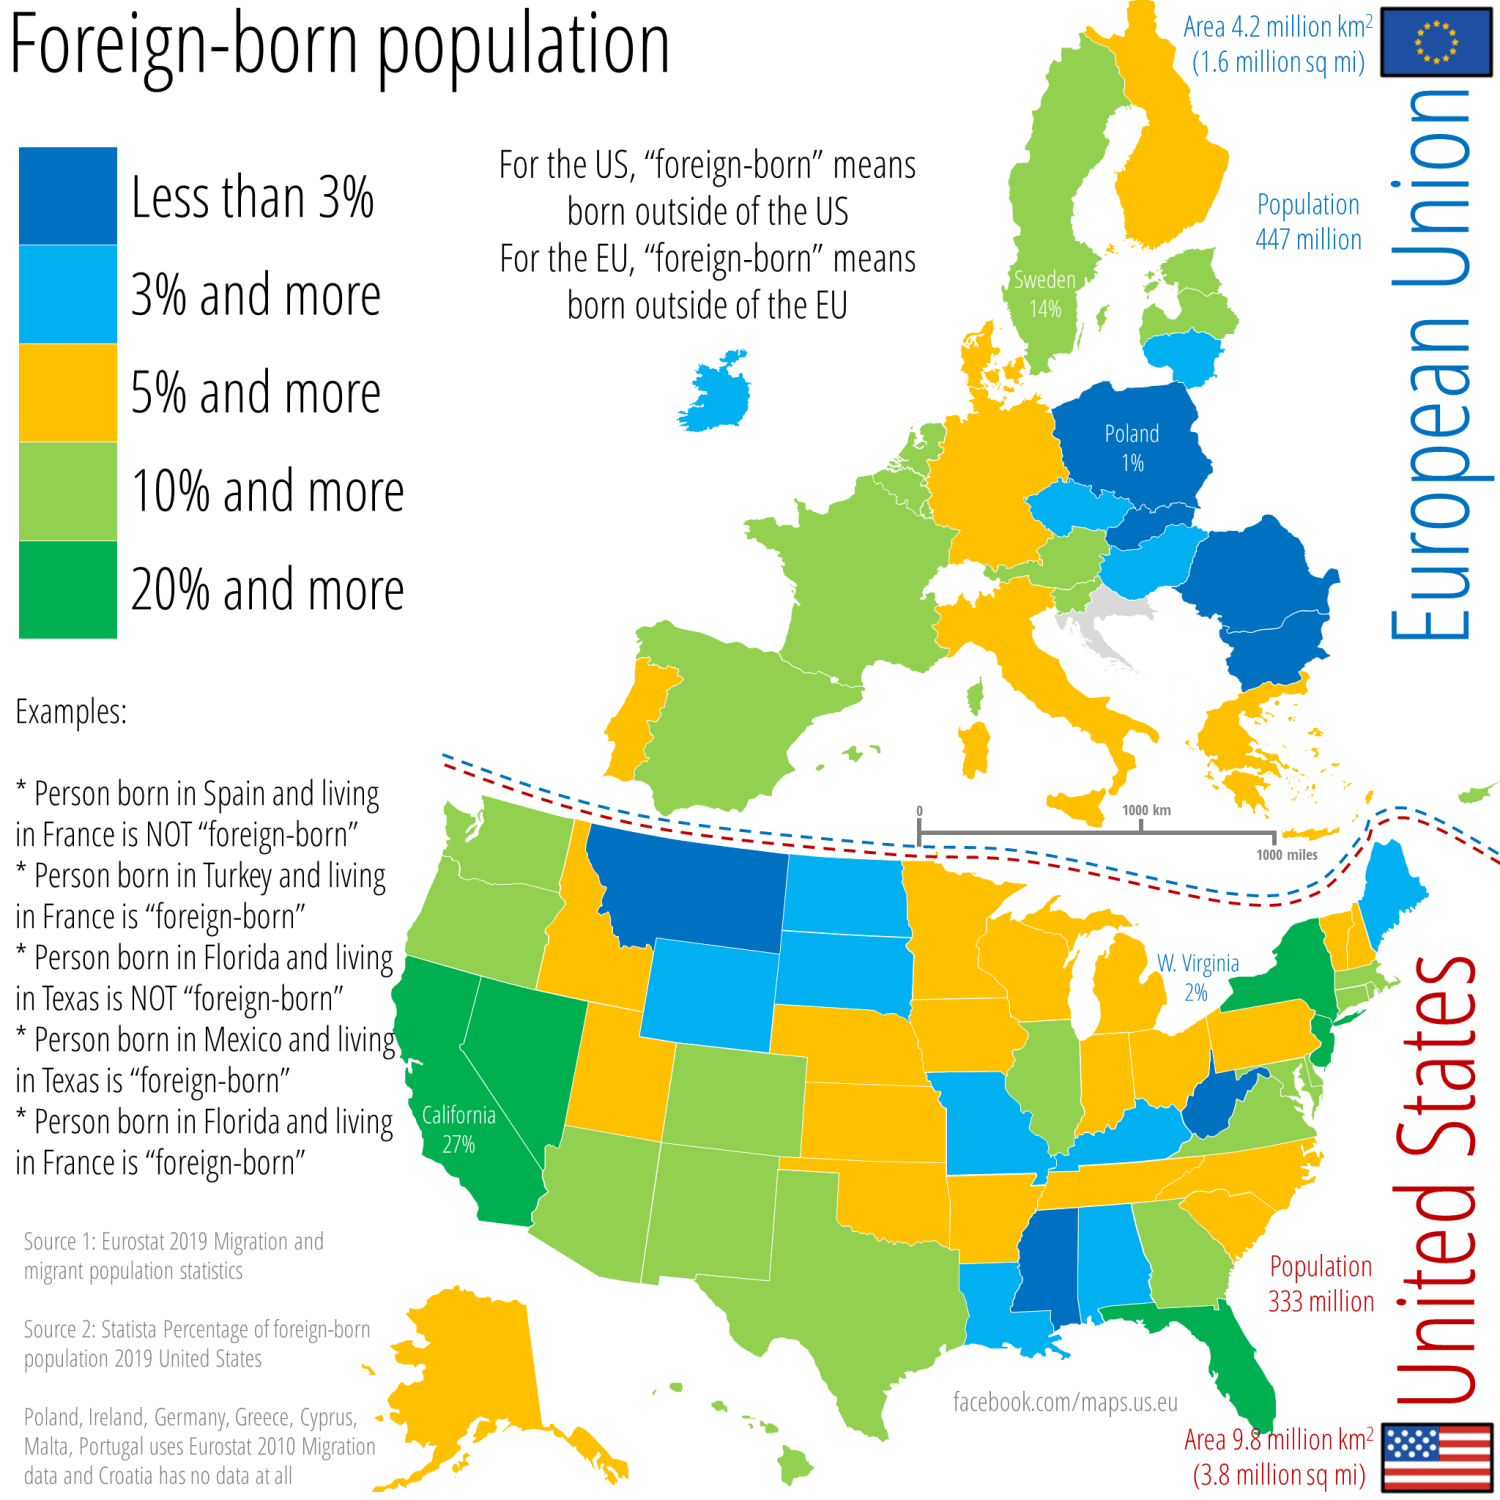 Percent of "foreign-born" population in each US and EU state or country. For the EU, "foreign-born" mean being born outside of any of the EU countries. For the US, "foreign-born" mean being born outside of any US state 🇺🇸🇪🇺🗺️